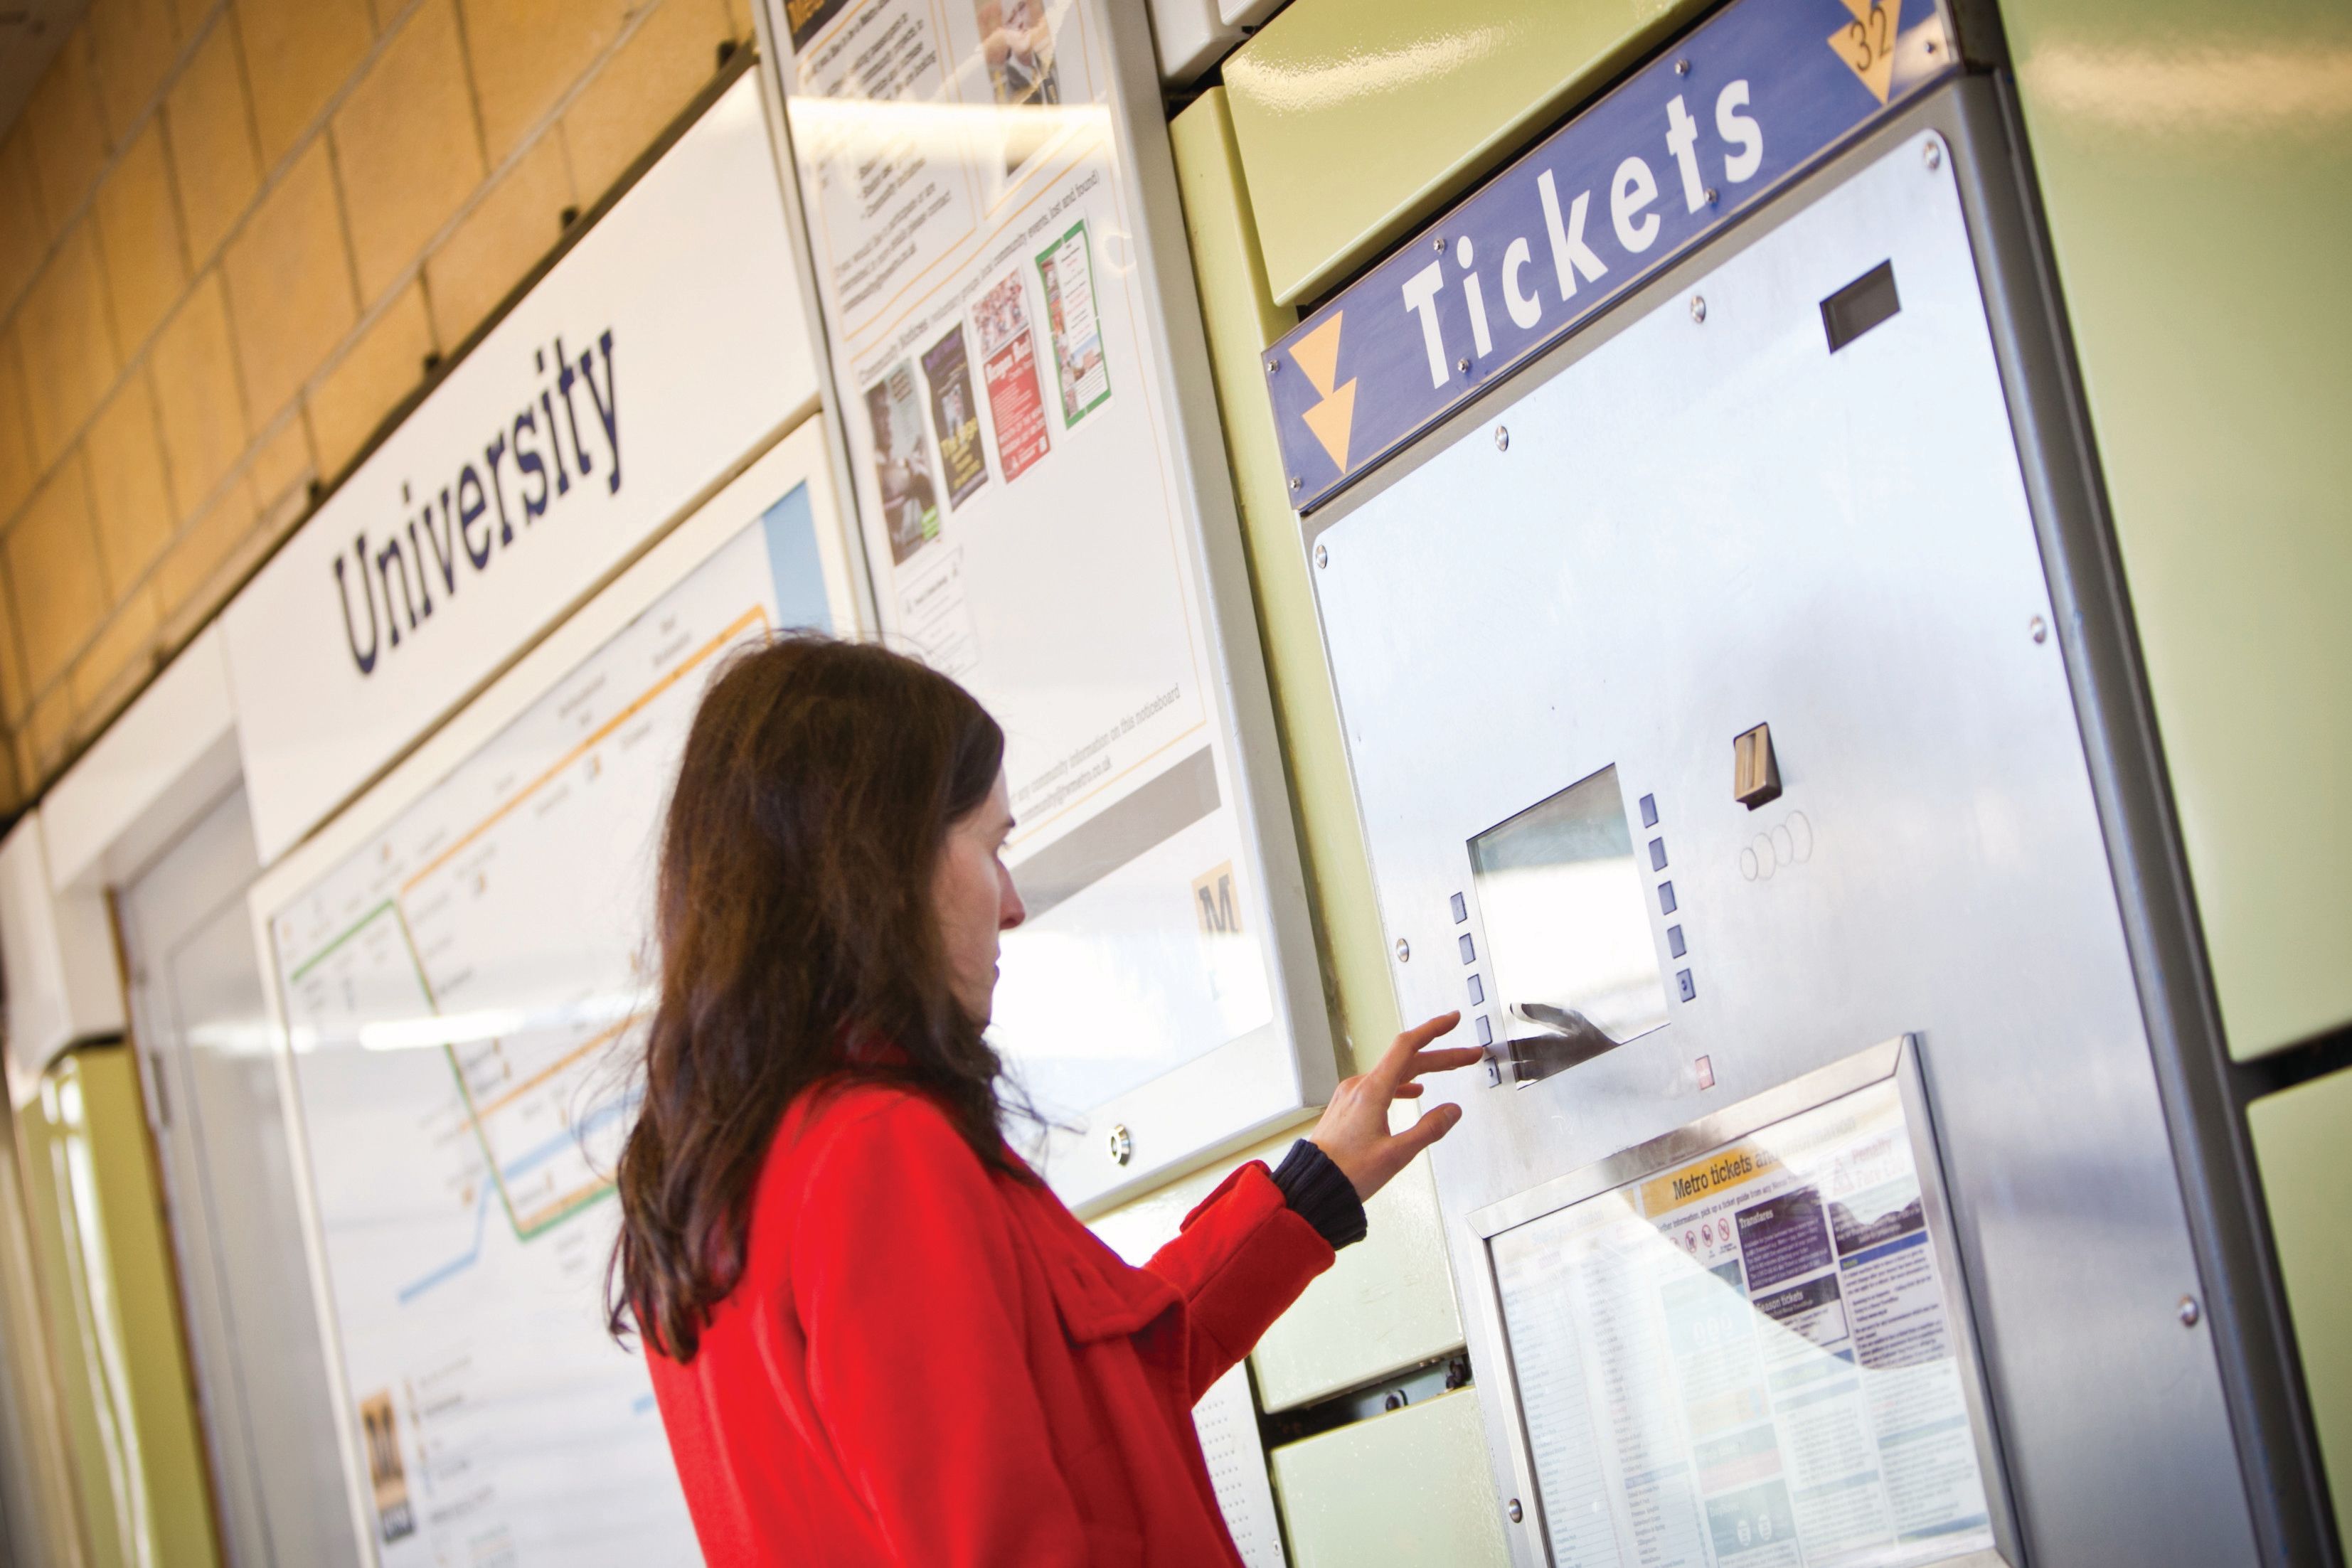 A woman purchases a metro ticket at University station